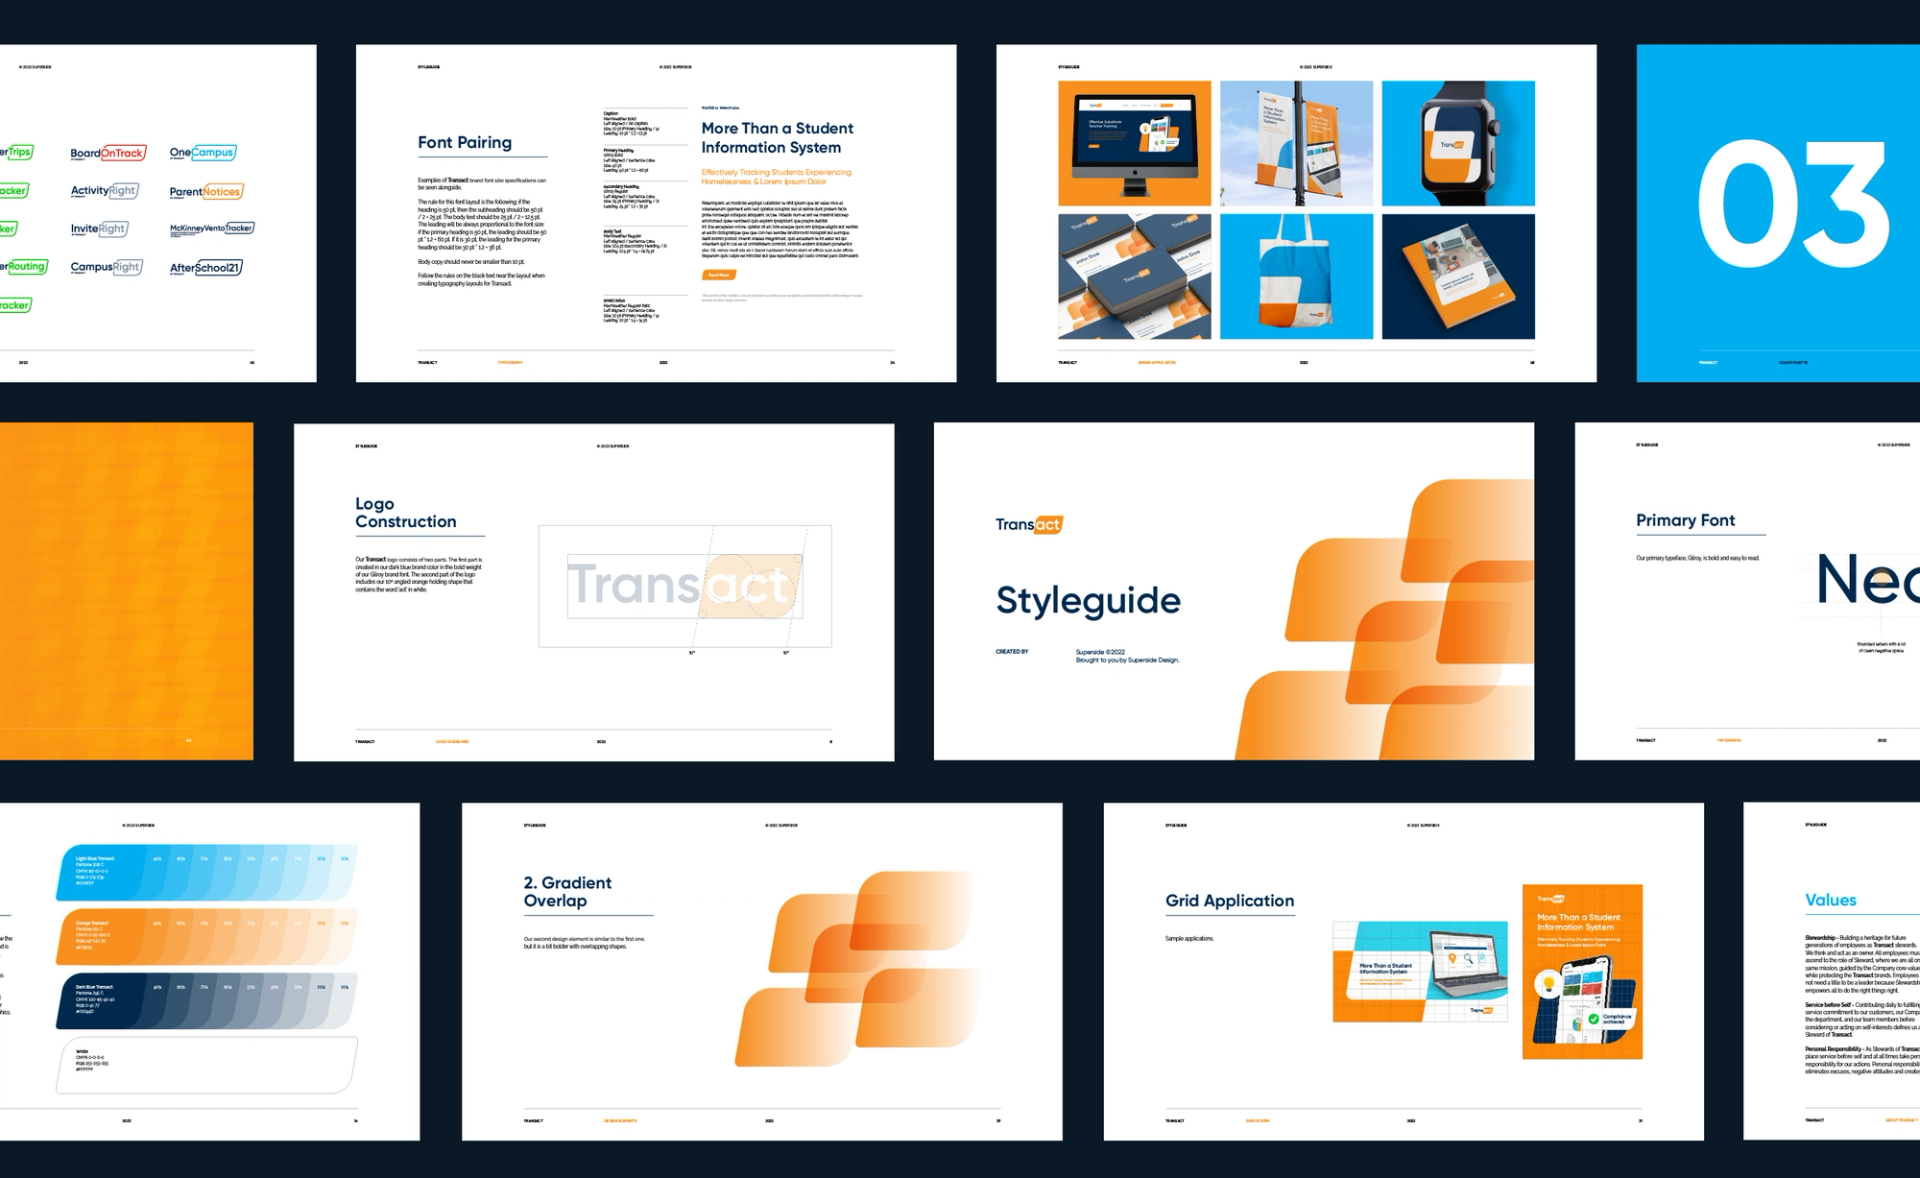 TransAct's Brand Guide by Superside